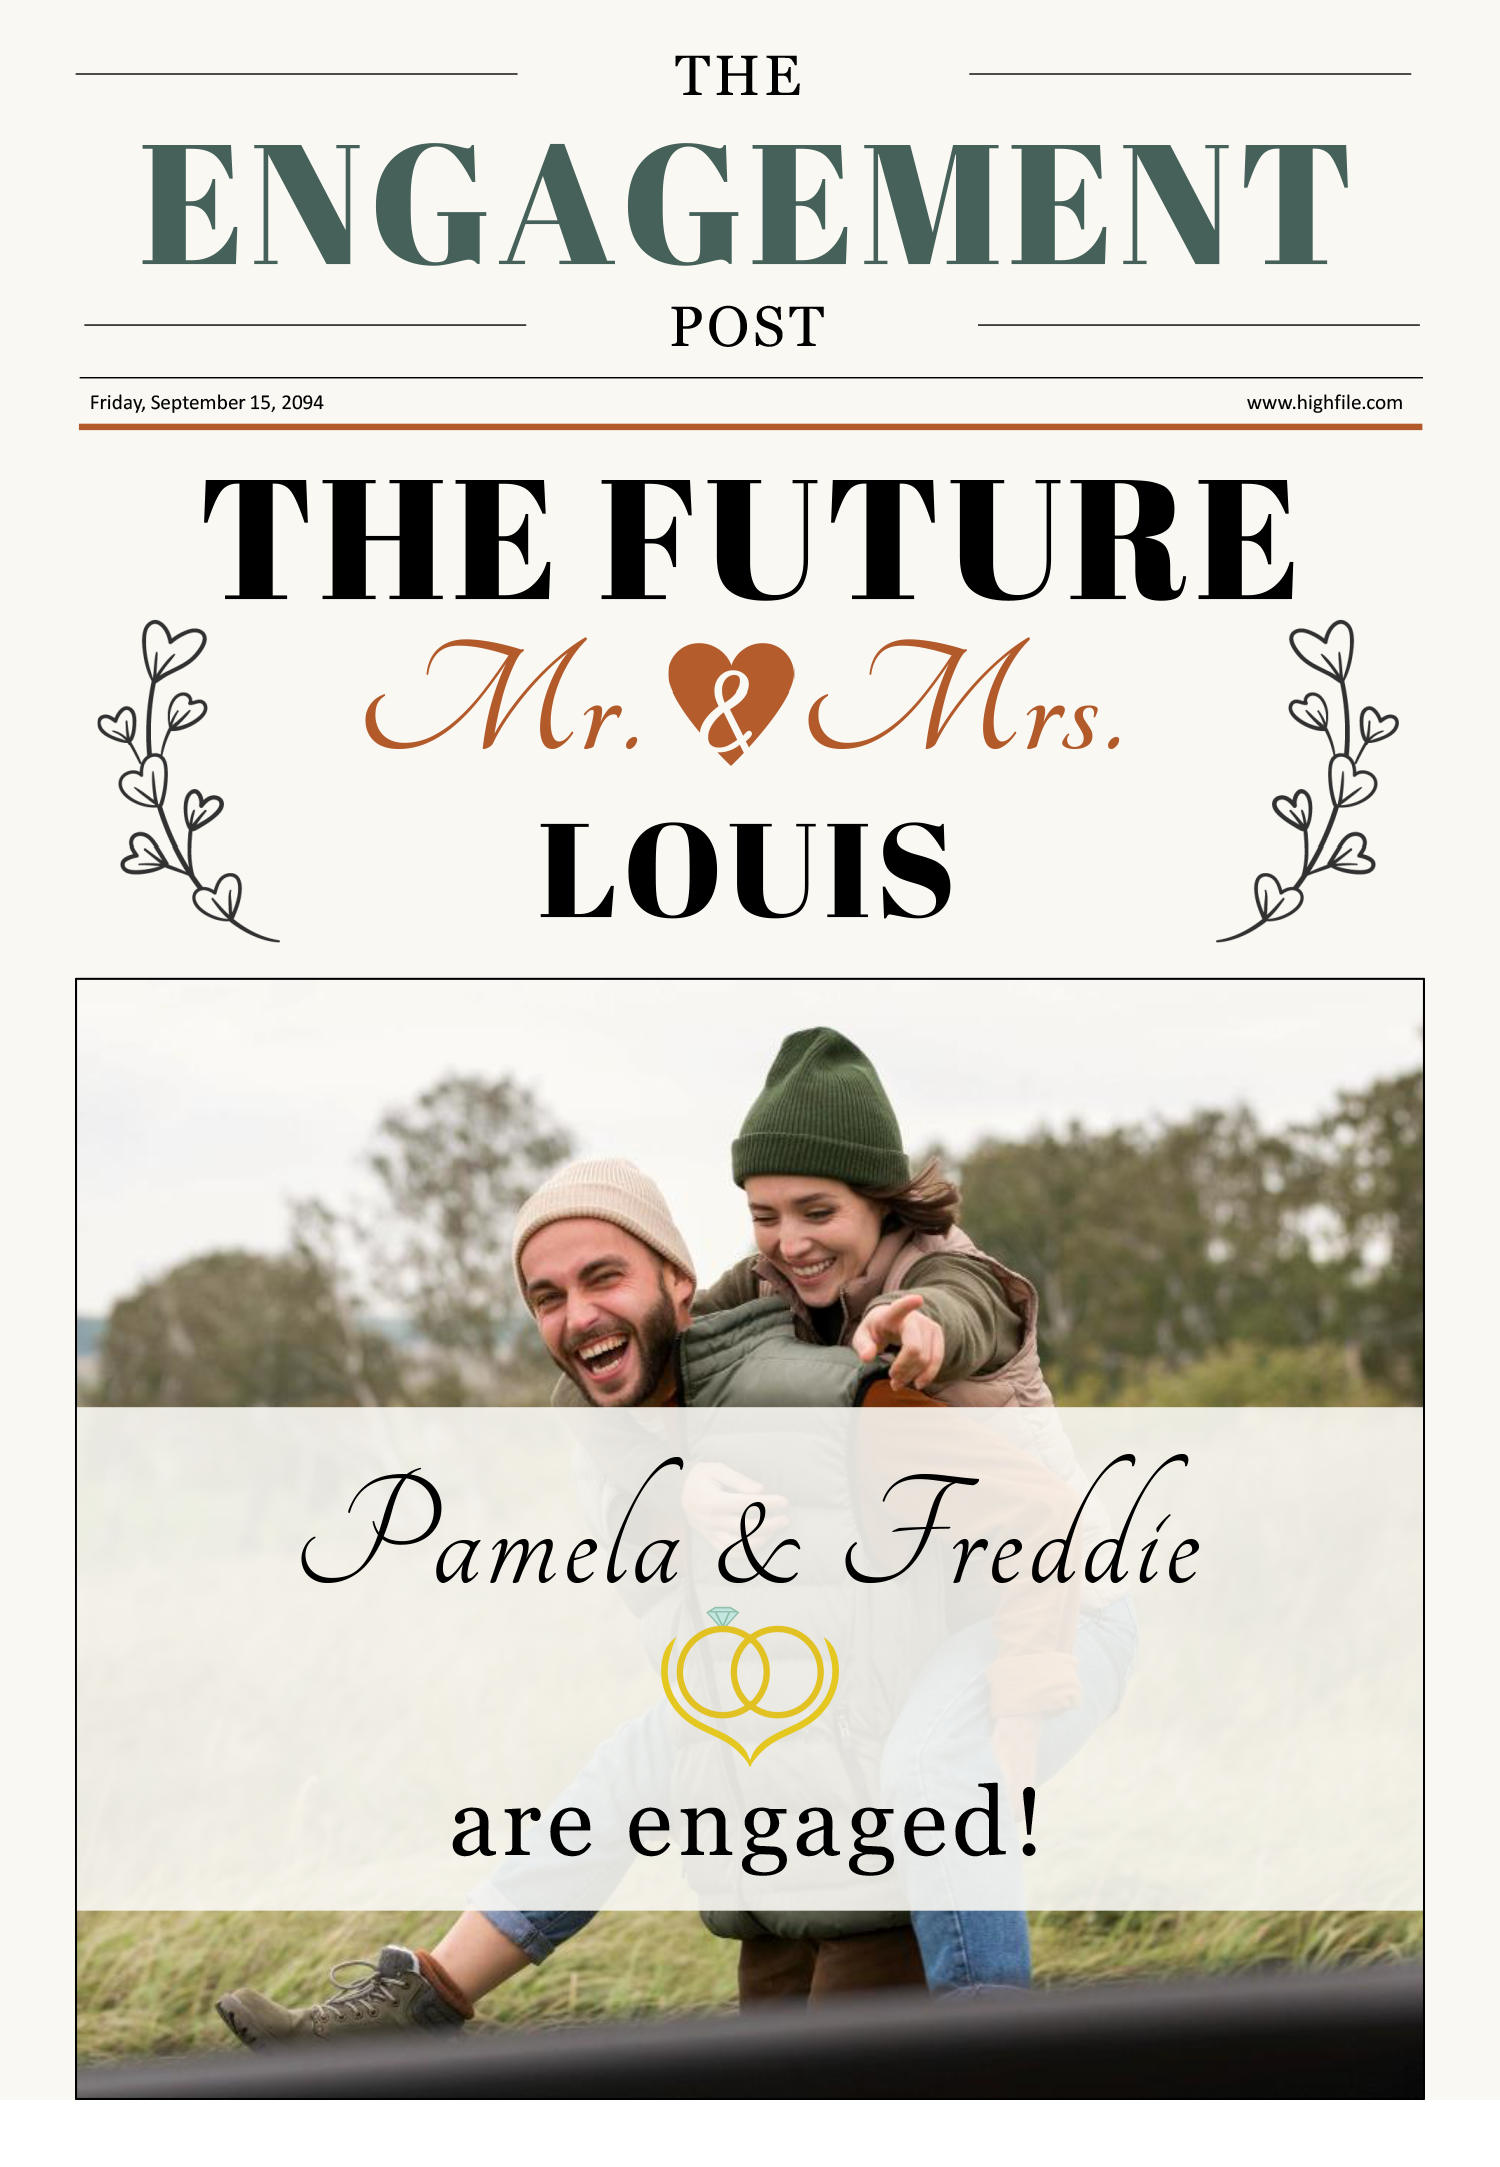 Breaking News Engagement Newspaper Template - Front Page